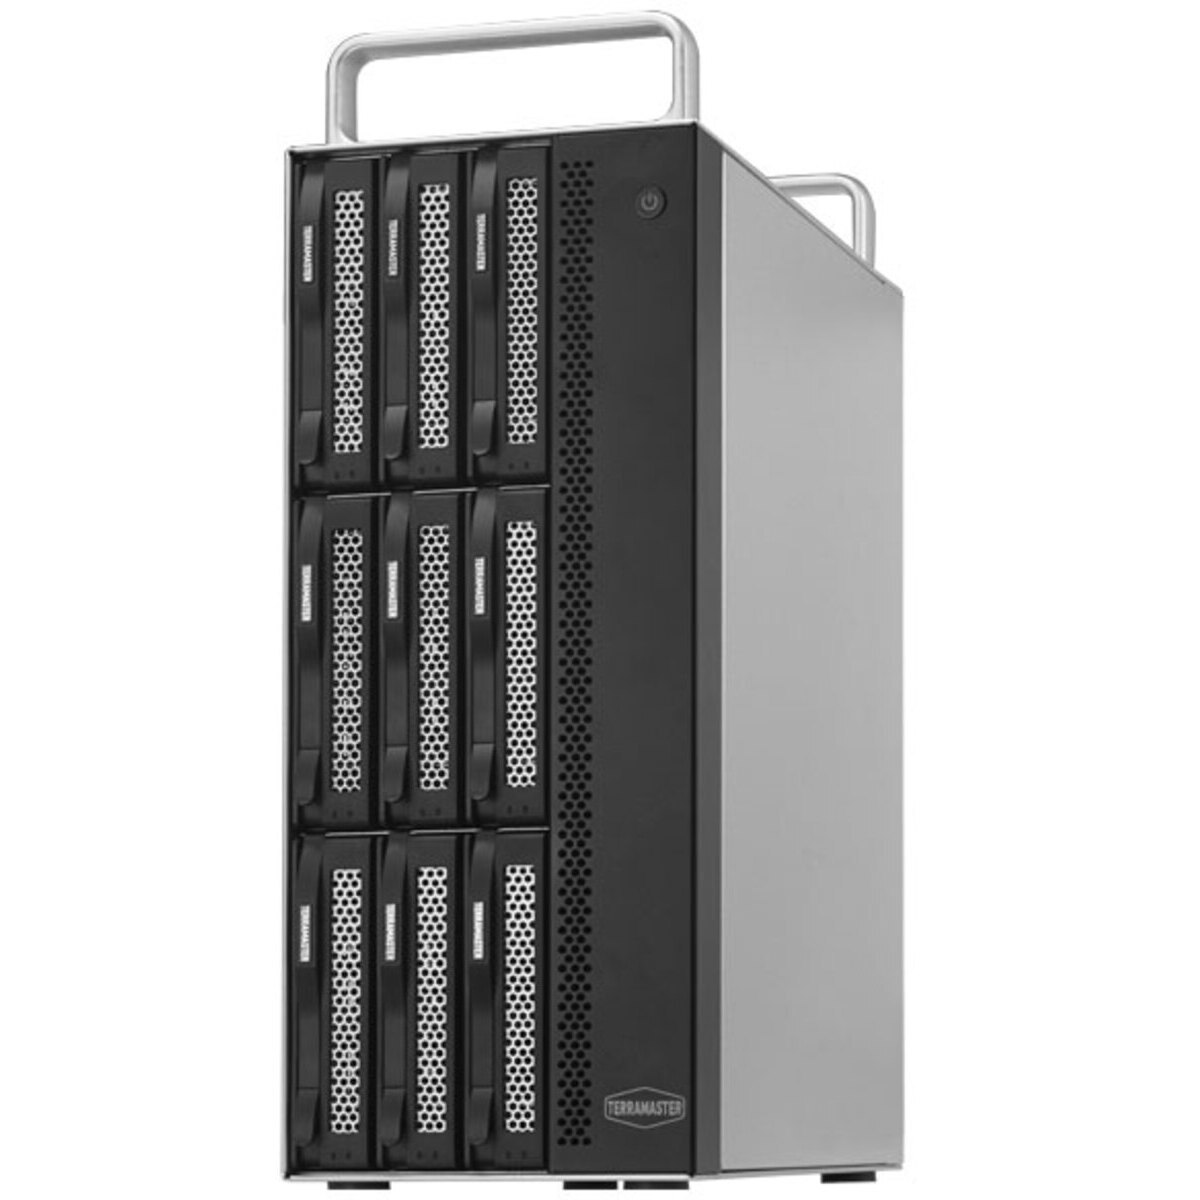 TerraMaster D8-322 60tb 8-Bay Desktop Multimedia / Power User / Business DAS - Direct Attached Storage Device 5x12tb Western Digital Red Pro WD121KFBX 3.5 7200rpm SATA 6Gb/s HDD NAS Class Drives Installed - Burn-In Tested D8-322